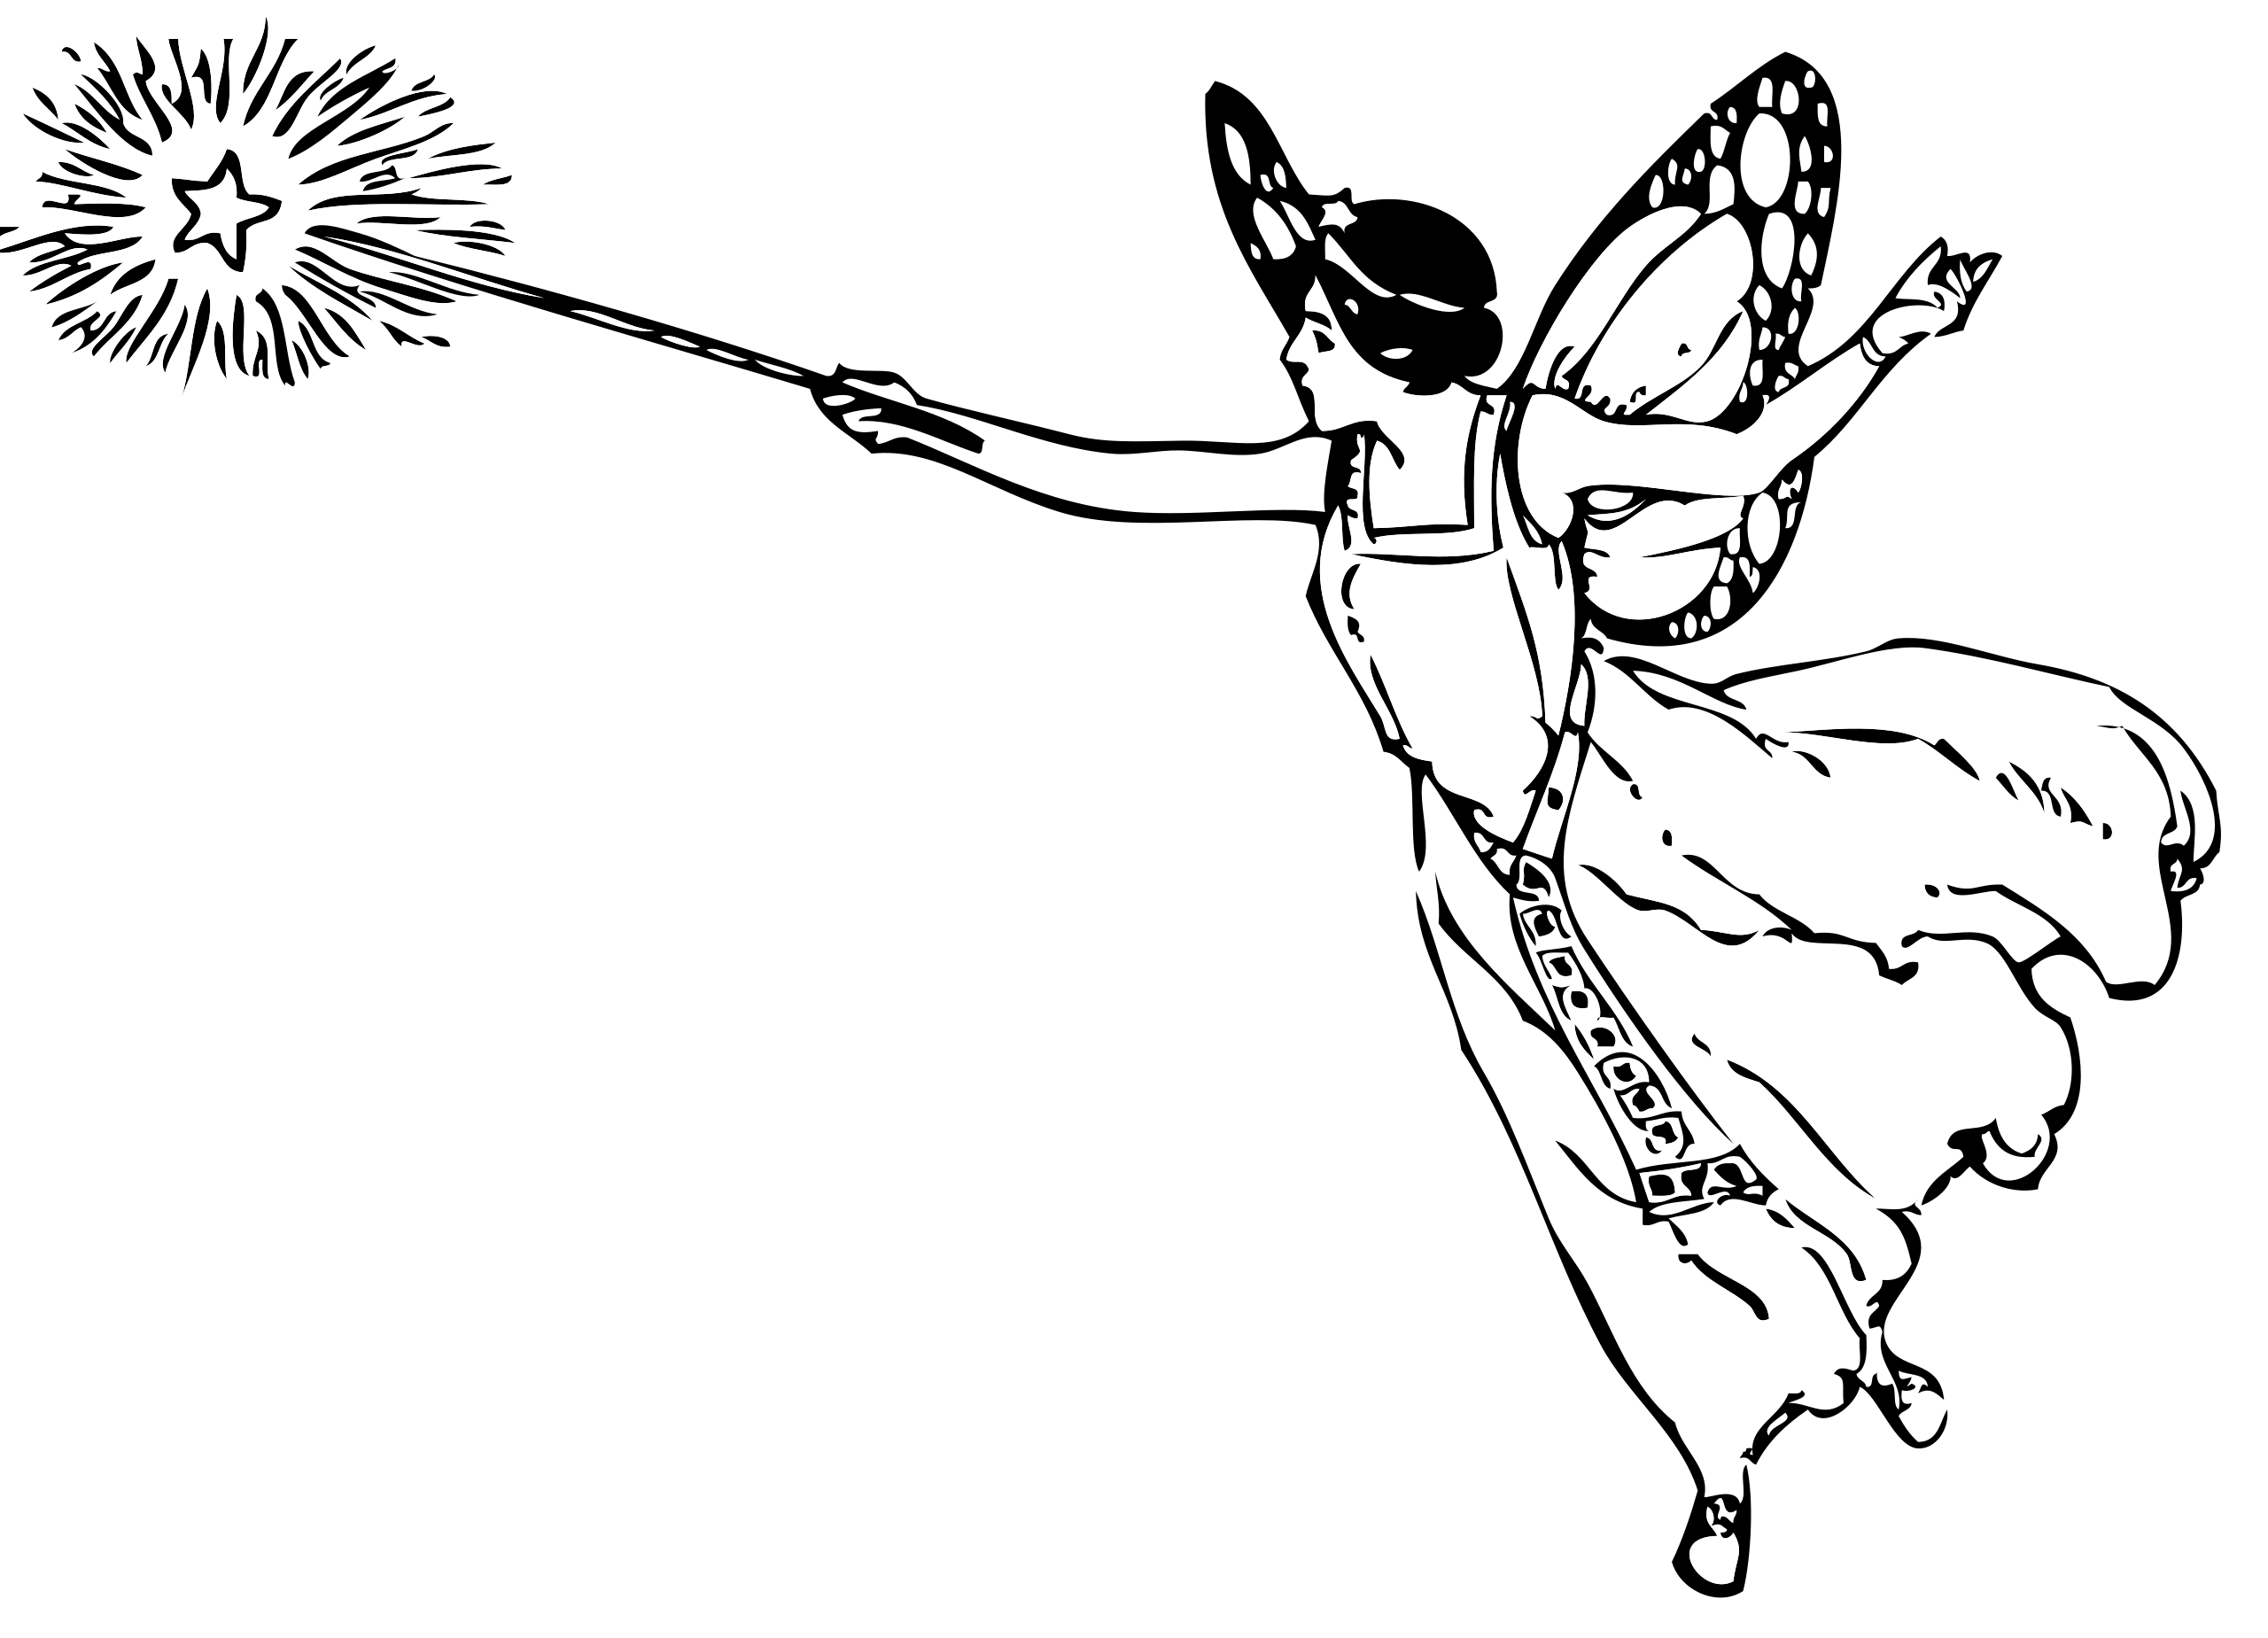 File:Fairy With Wand.svg - Wikimedia Commons